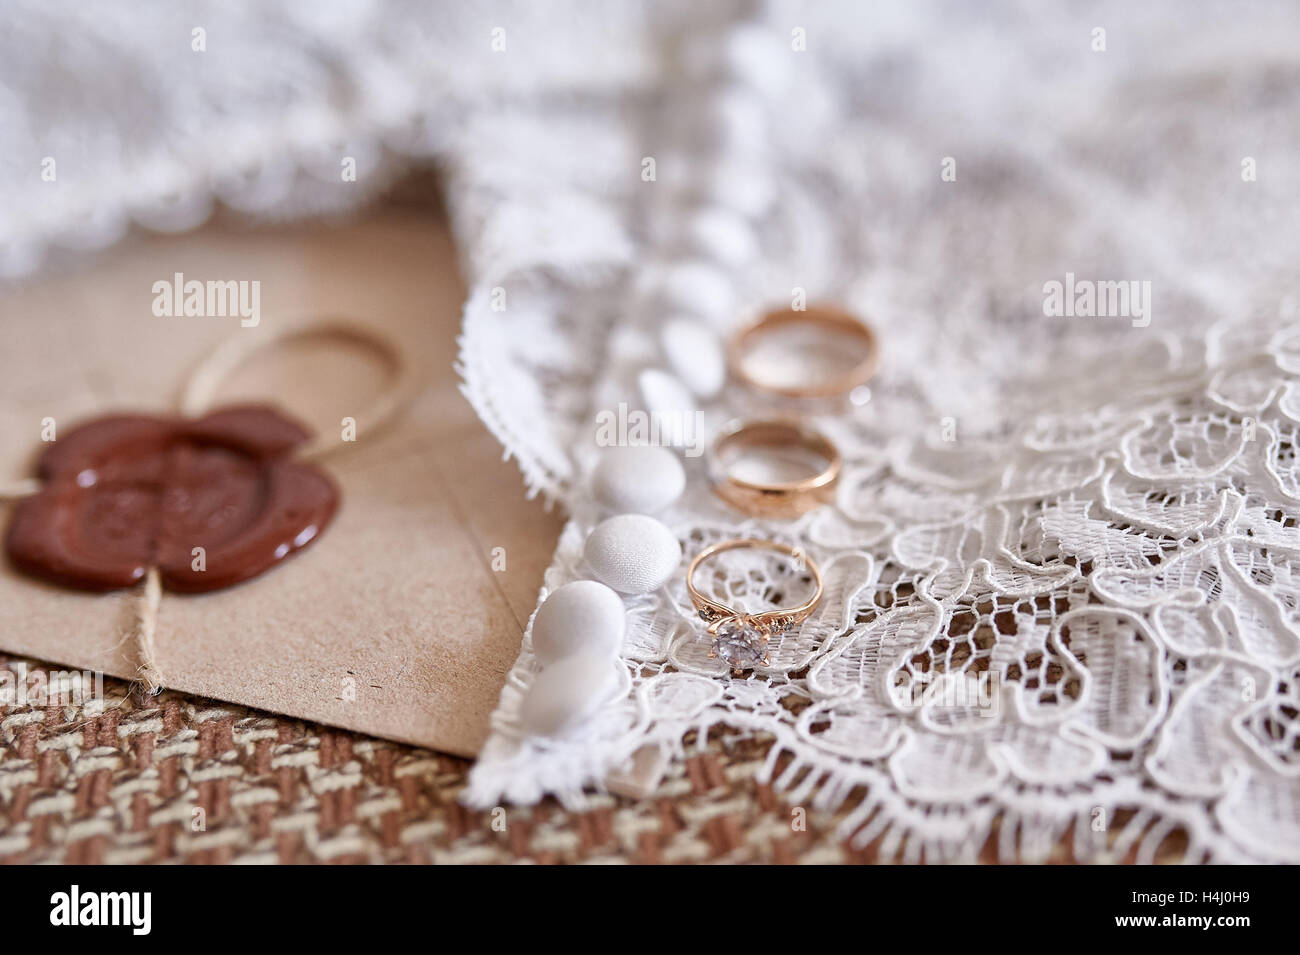 Wedding background with golden rings and veil Stock Photo